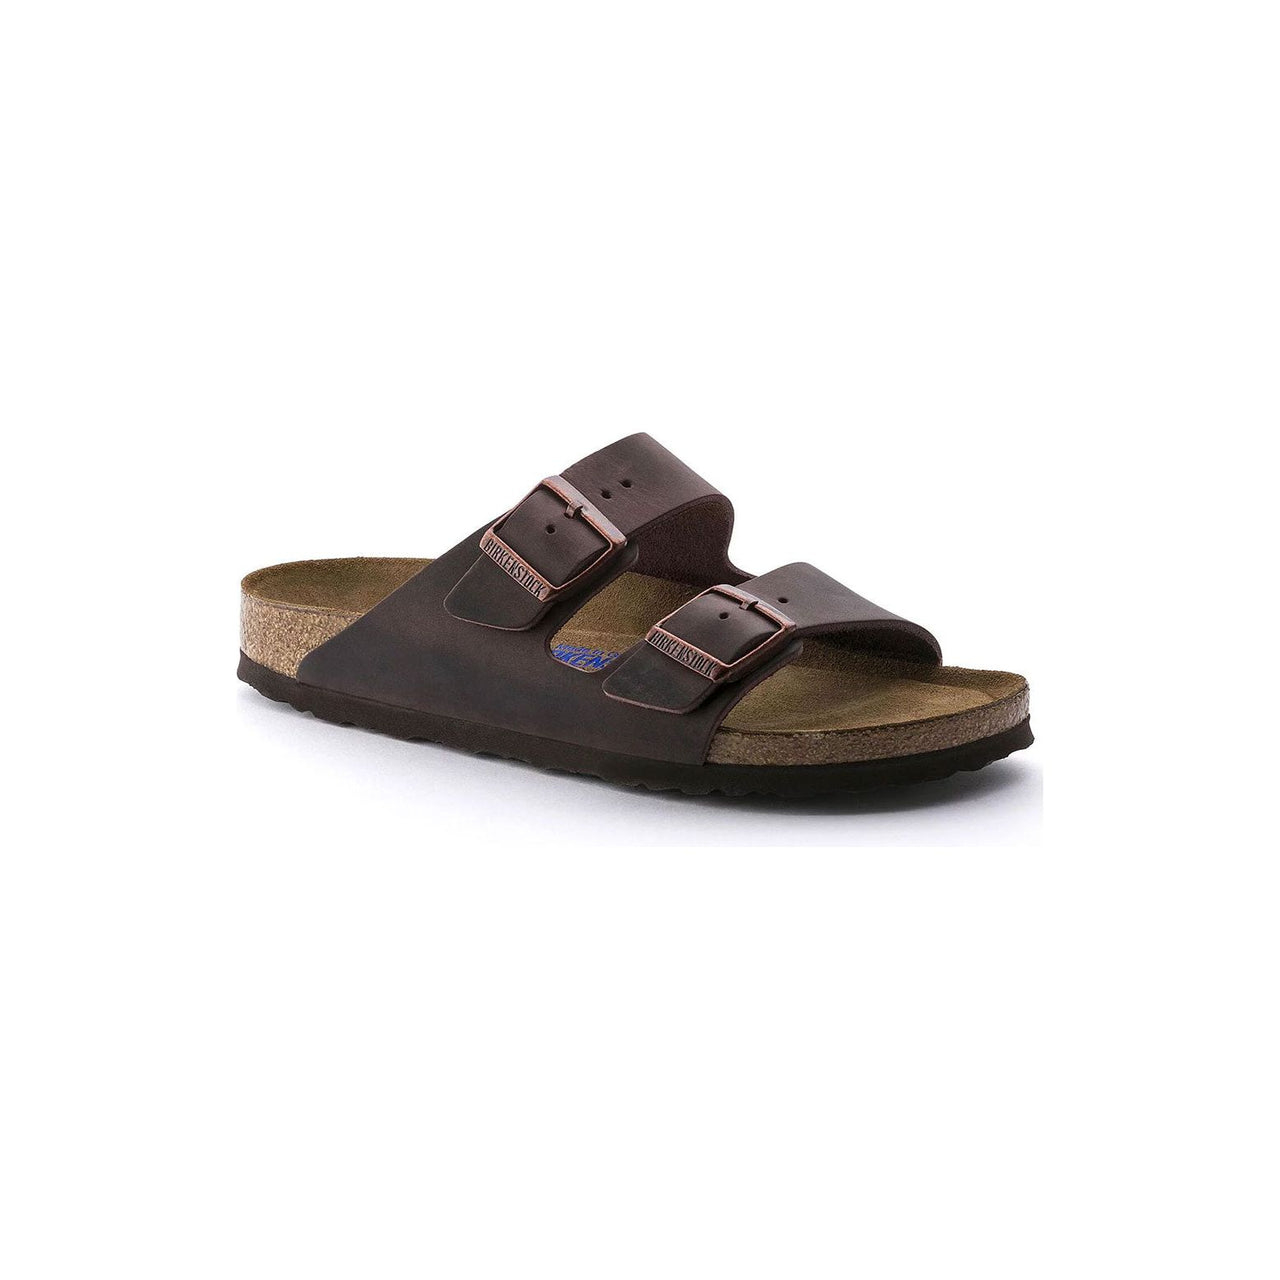 Arizona Soft Footbed Sandals Habana - Side view of comfortable and stylish sandals with soft footbed